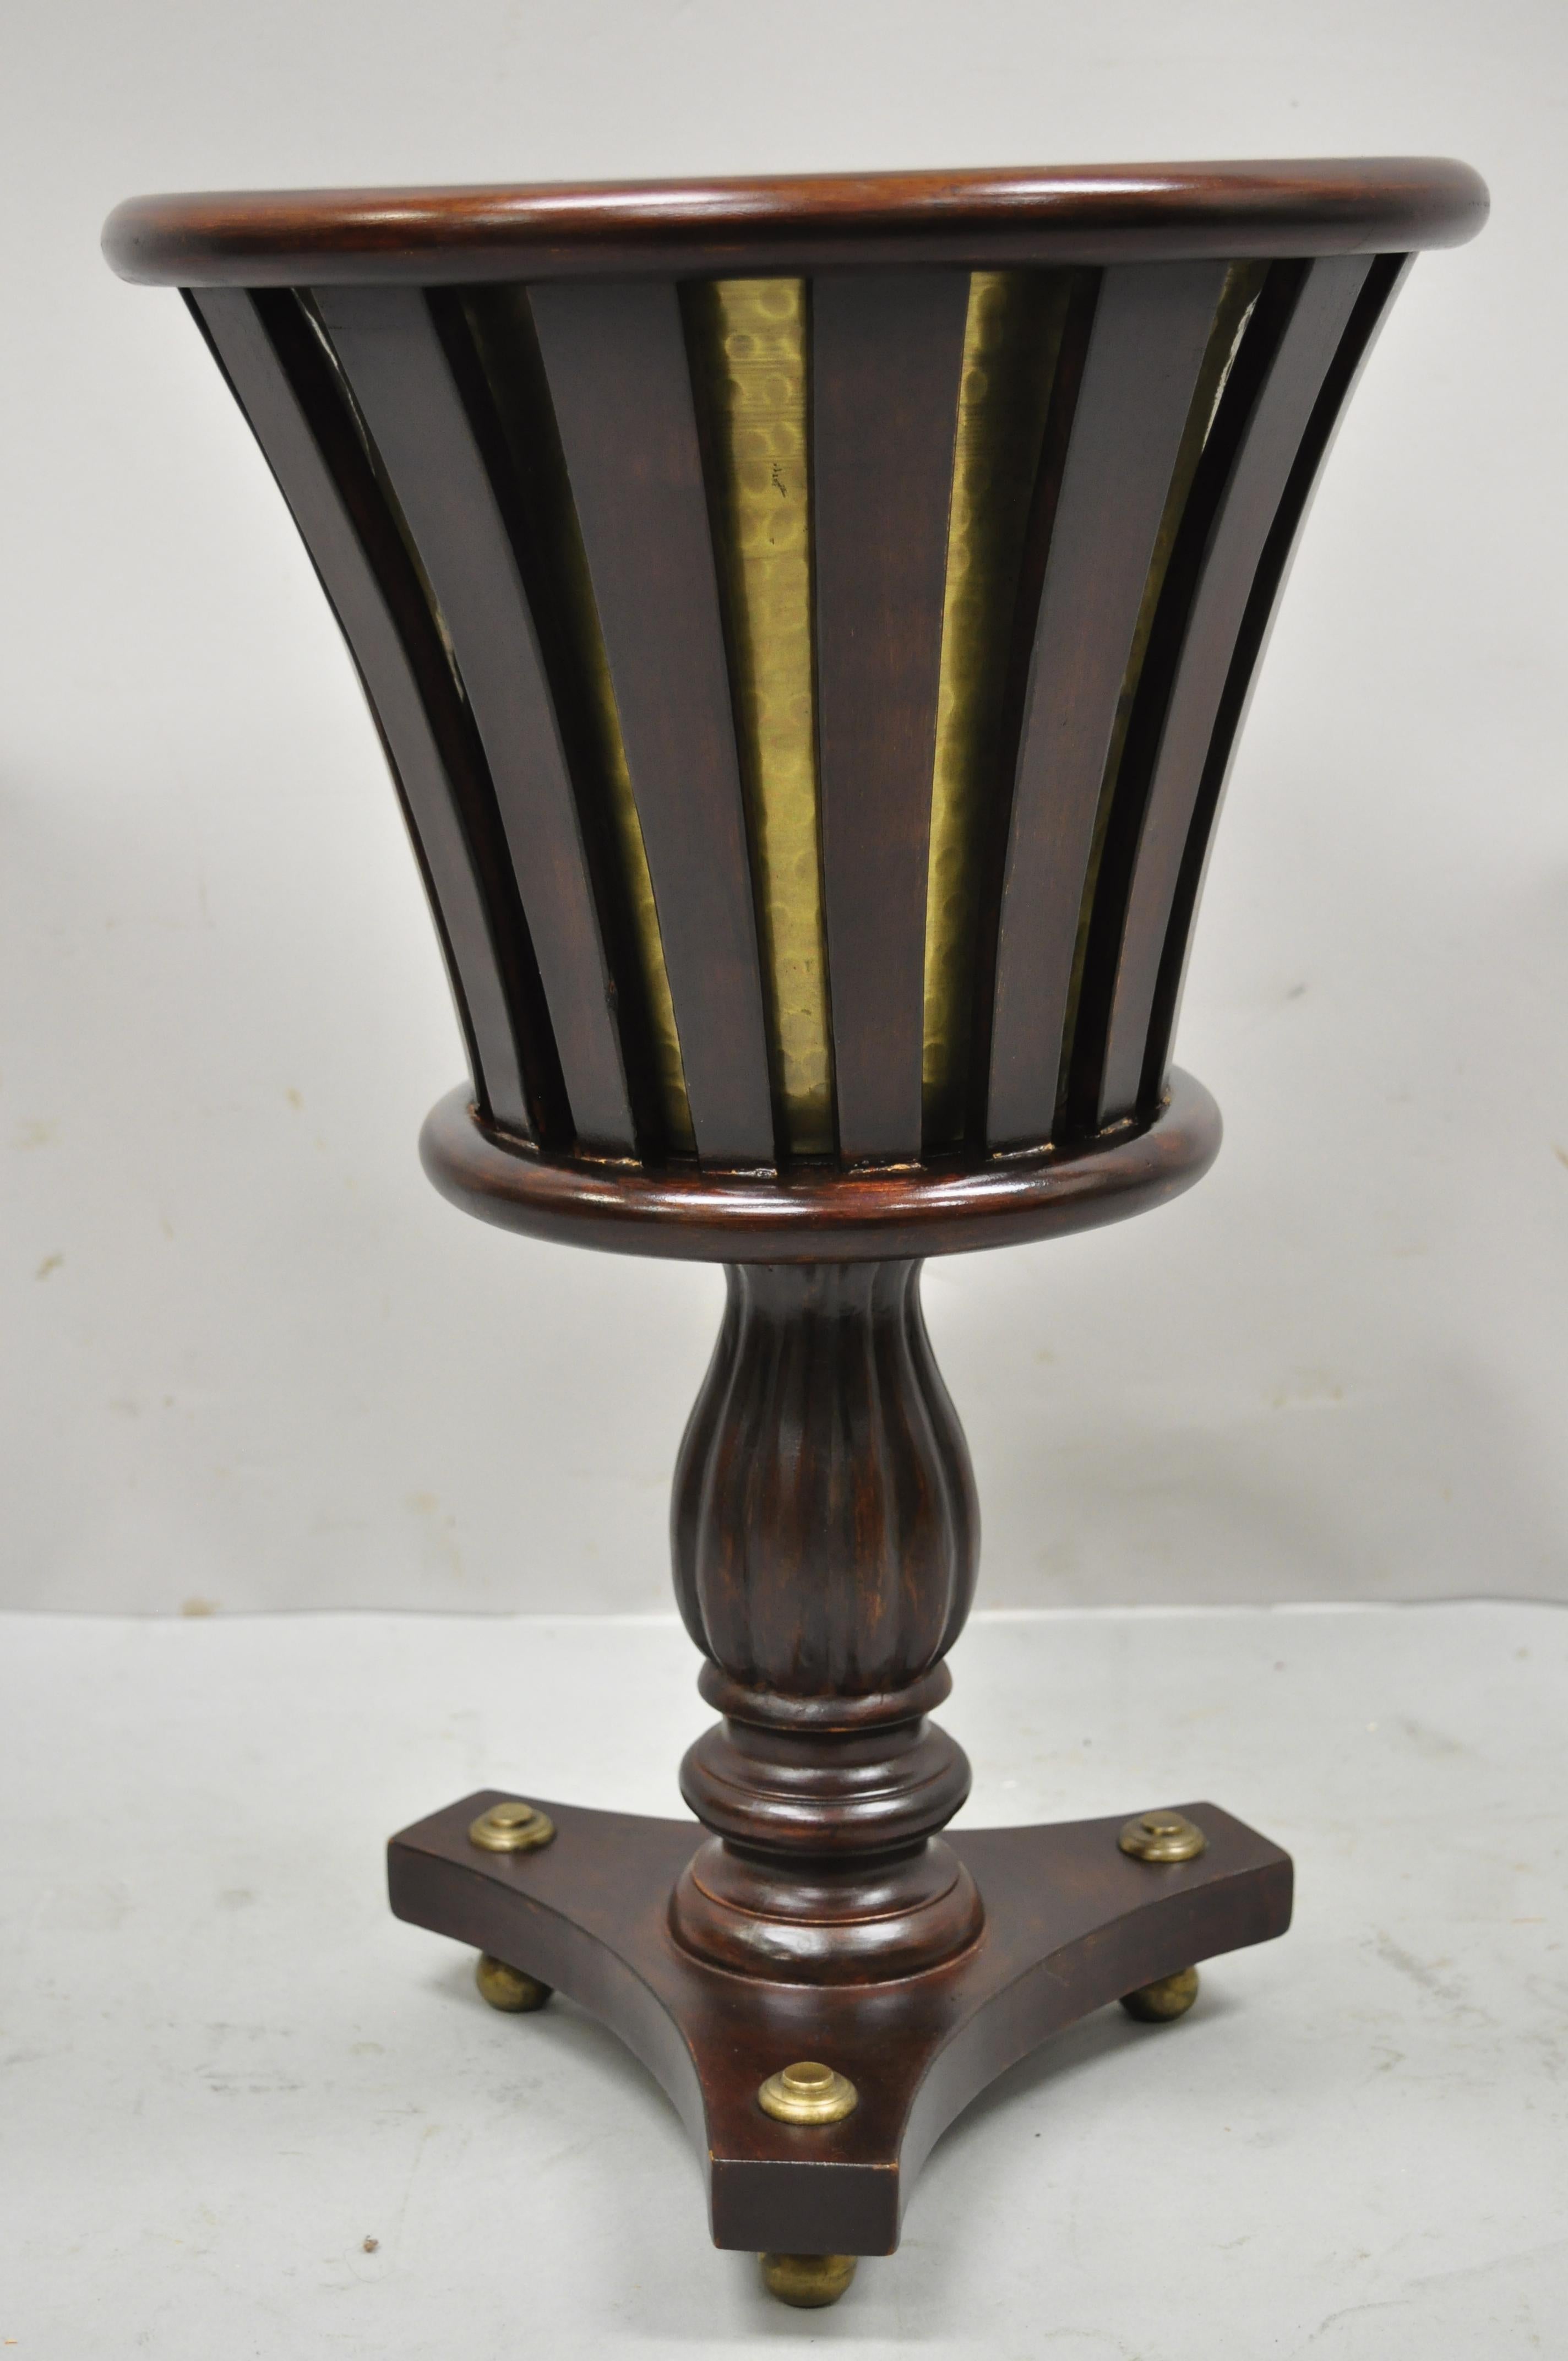 English Regency Style Mahogany Wooden Planter Plant Stand with Brass Pot Insert 6